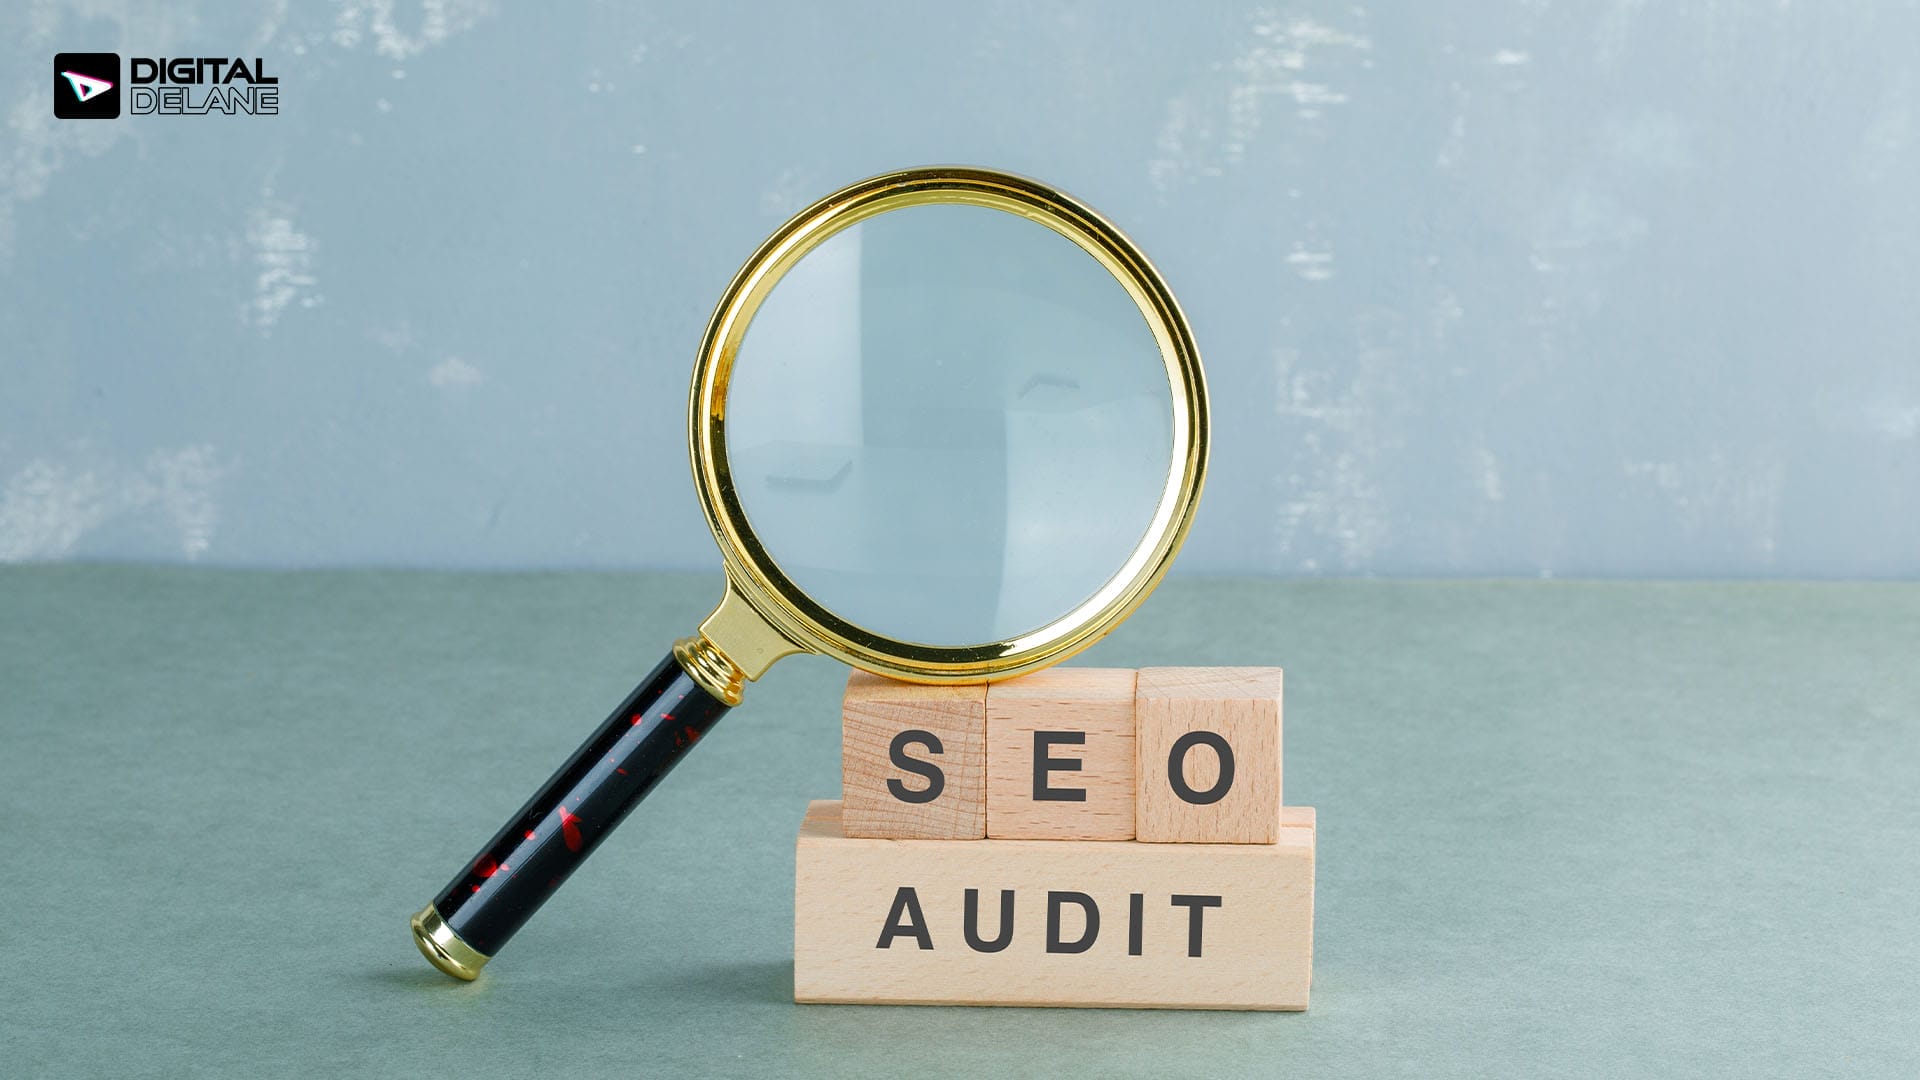 Common issues uncovered in a technical SEO audit